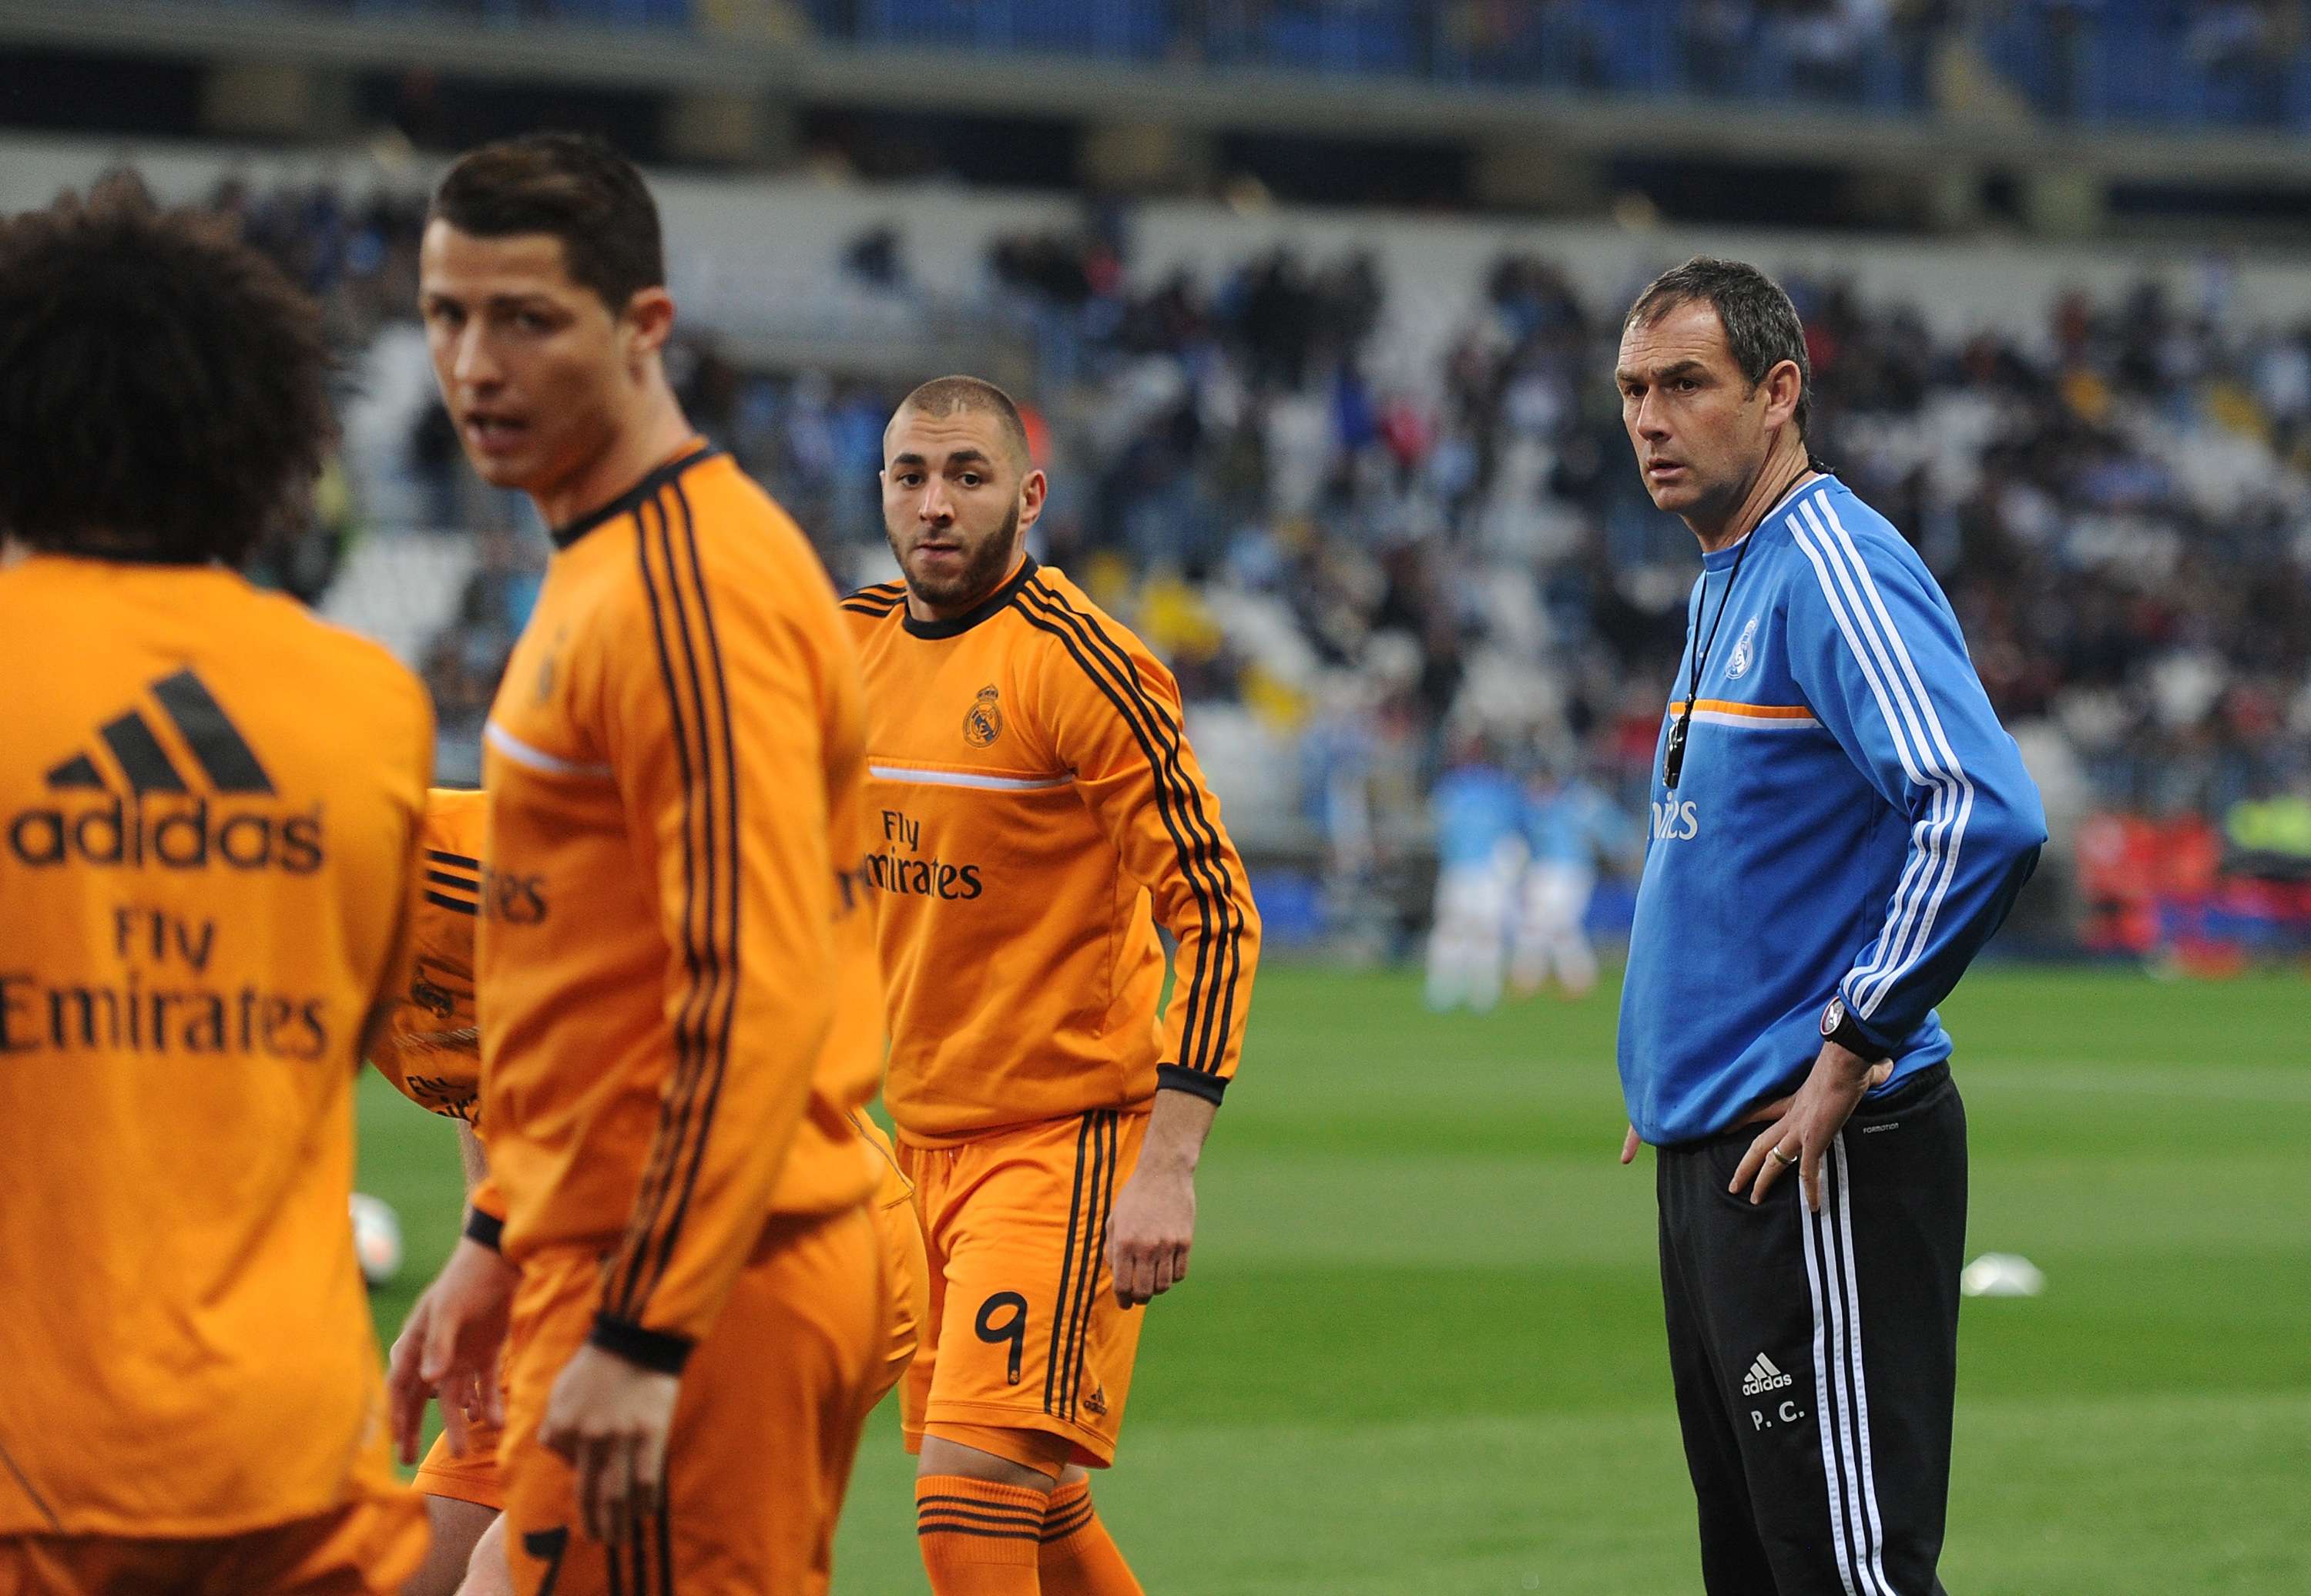 Paul Clement, Cristiano Ronaldo and Karim Benzema with Real Madrid